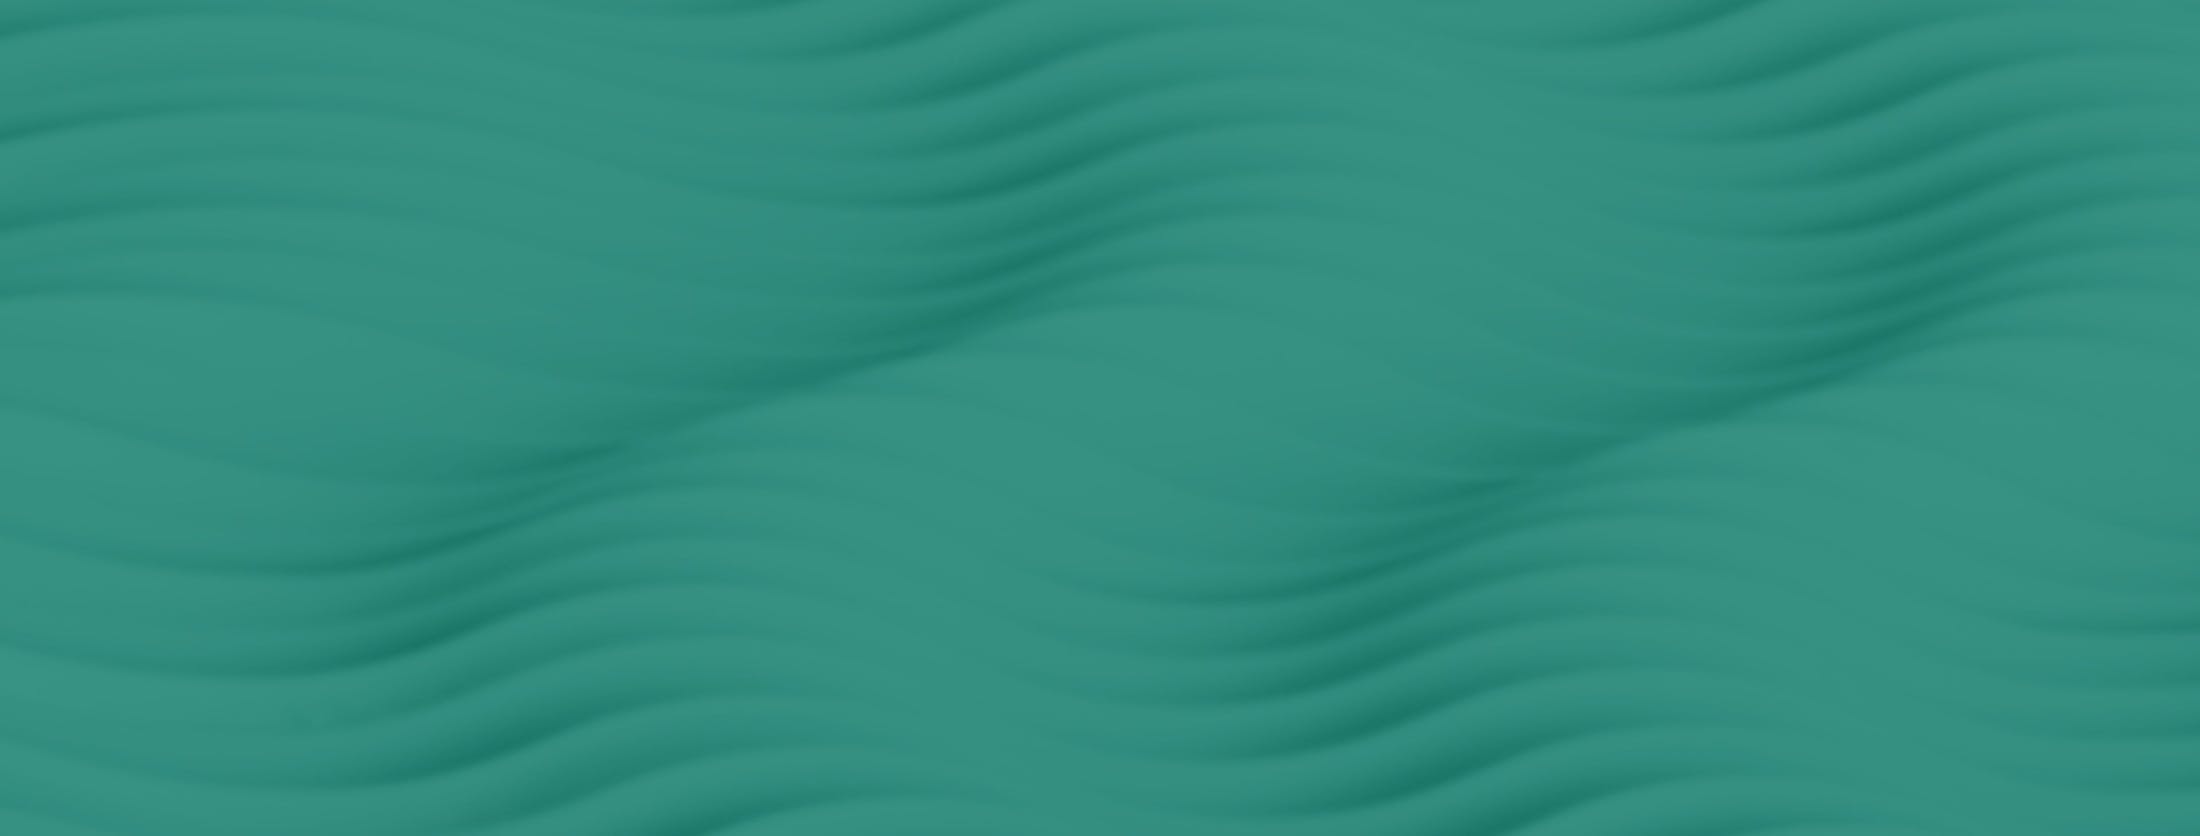 Green background image